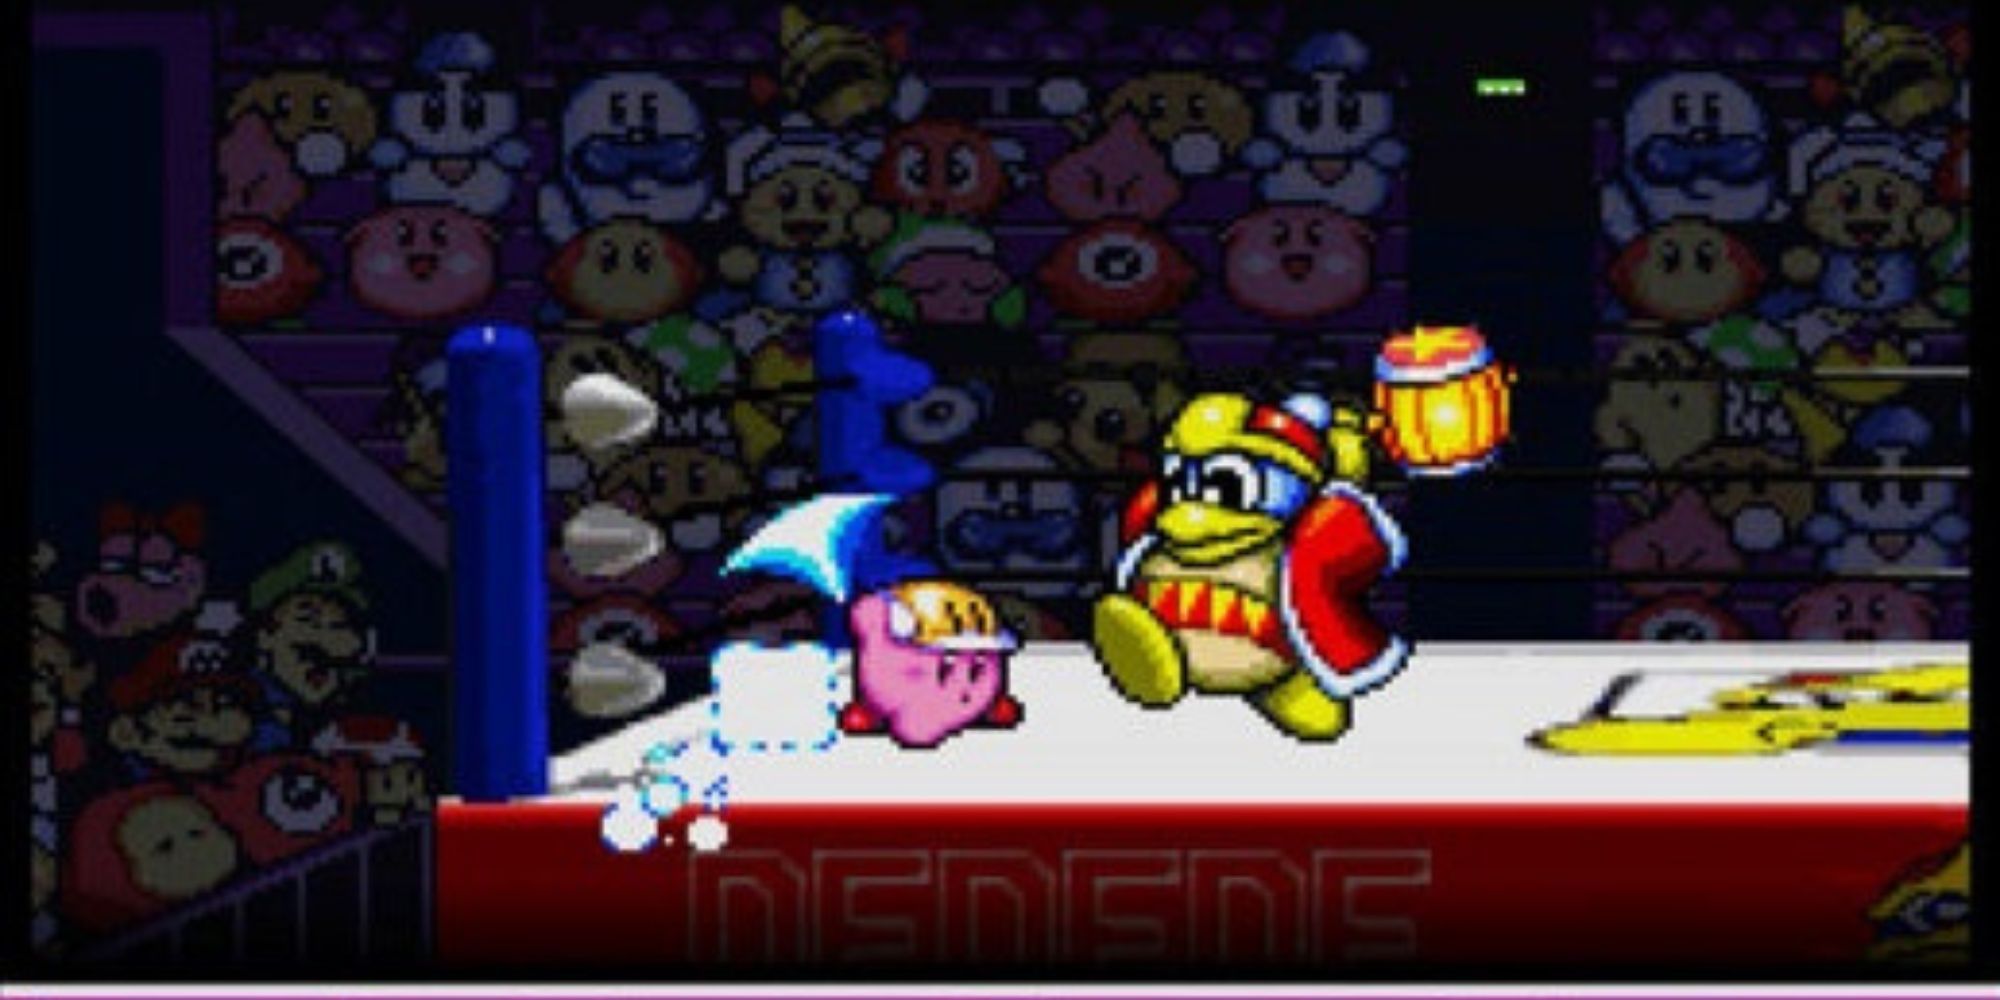 Kirby uses the cutter ability on King Dedede in a ring